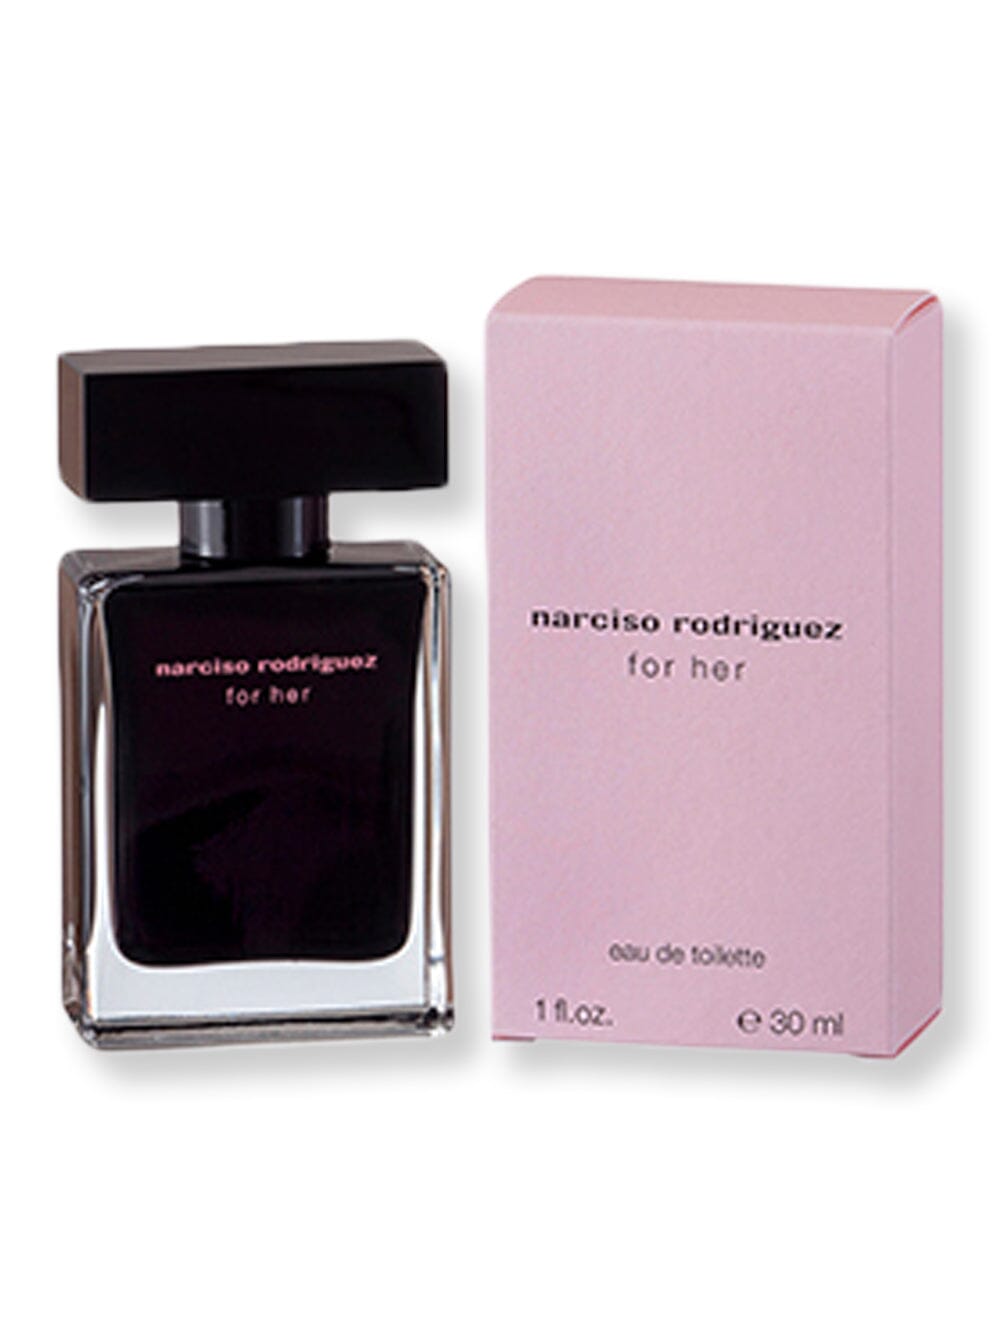 Narciso Rodriguez Narciso Rodriguez For Her EDT Spray 1 oz30 ml Perfume 